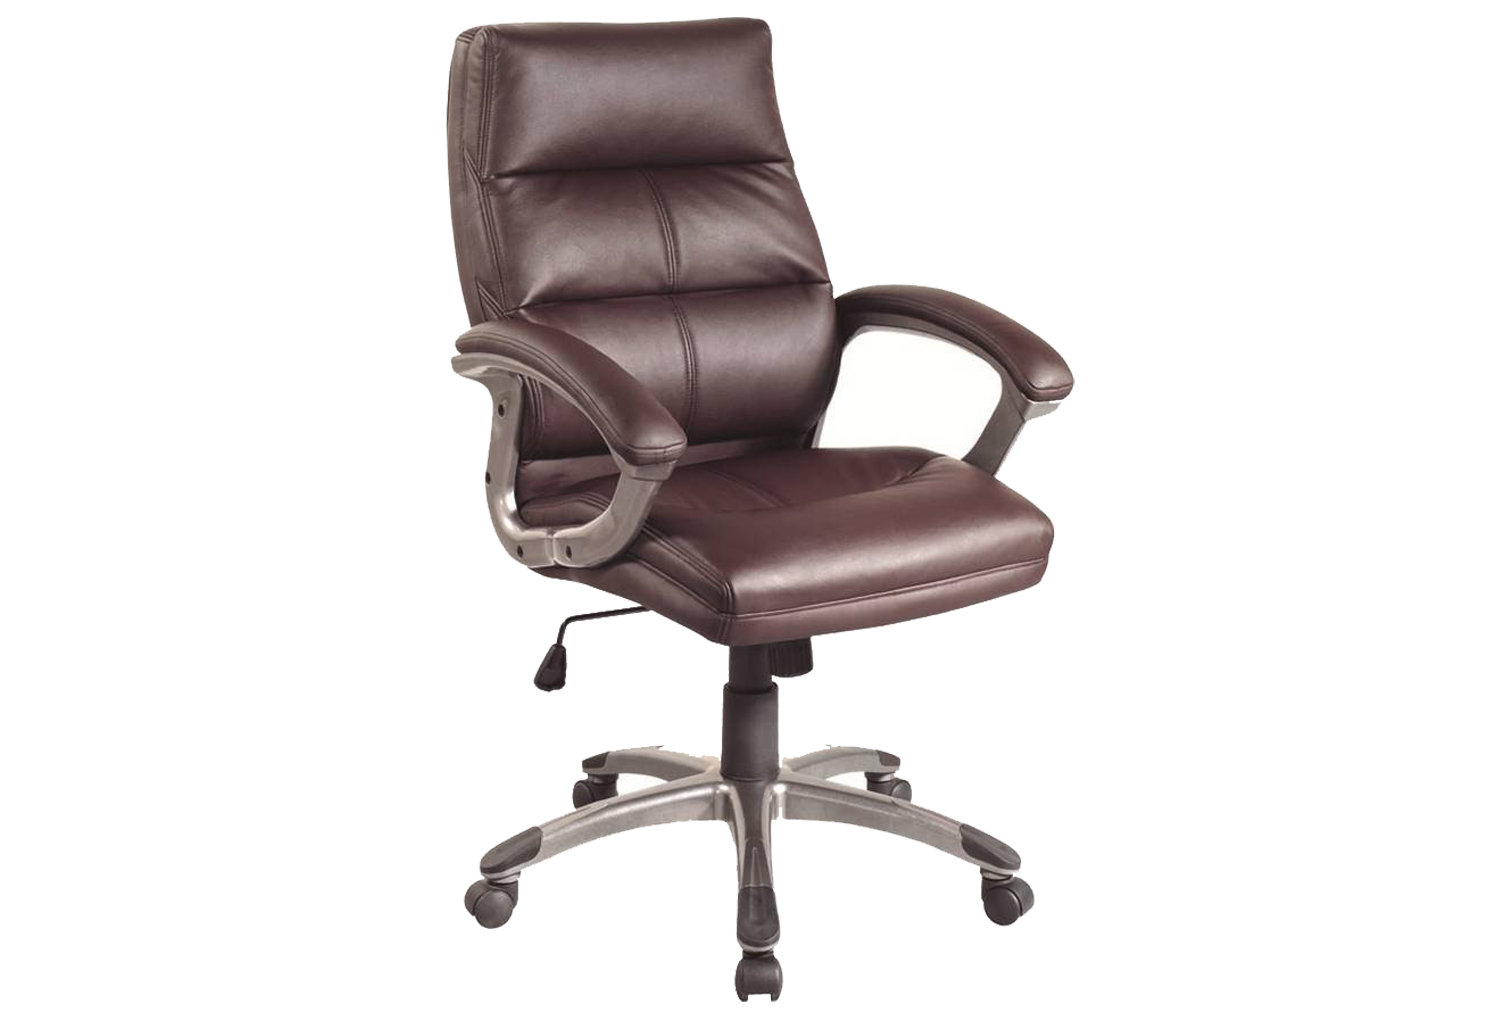 Telford Executive Office Chair (Cherry Brown), Fully Installed